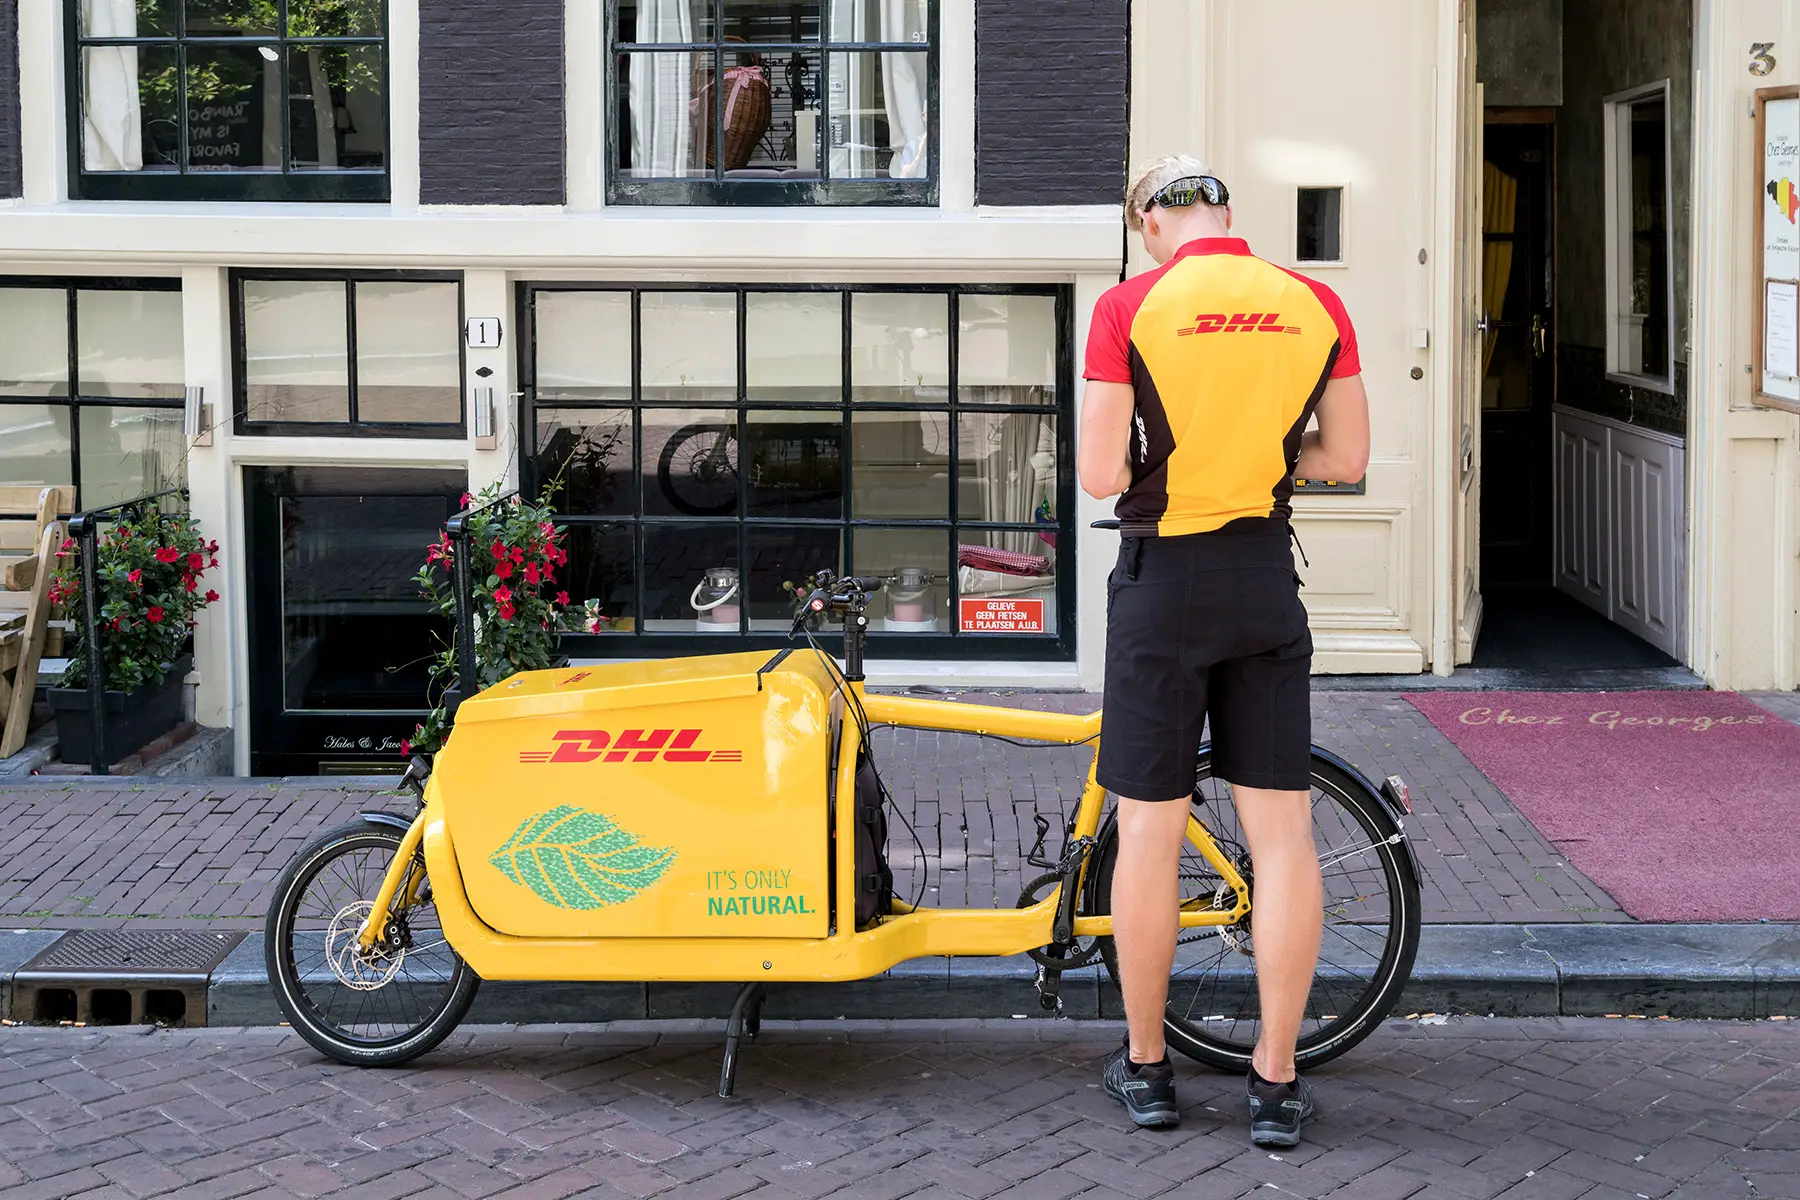 DHL delivery bike in Amsterdam